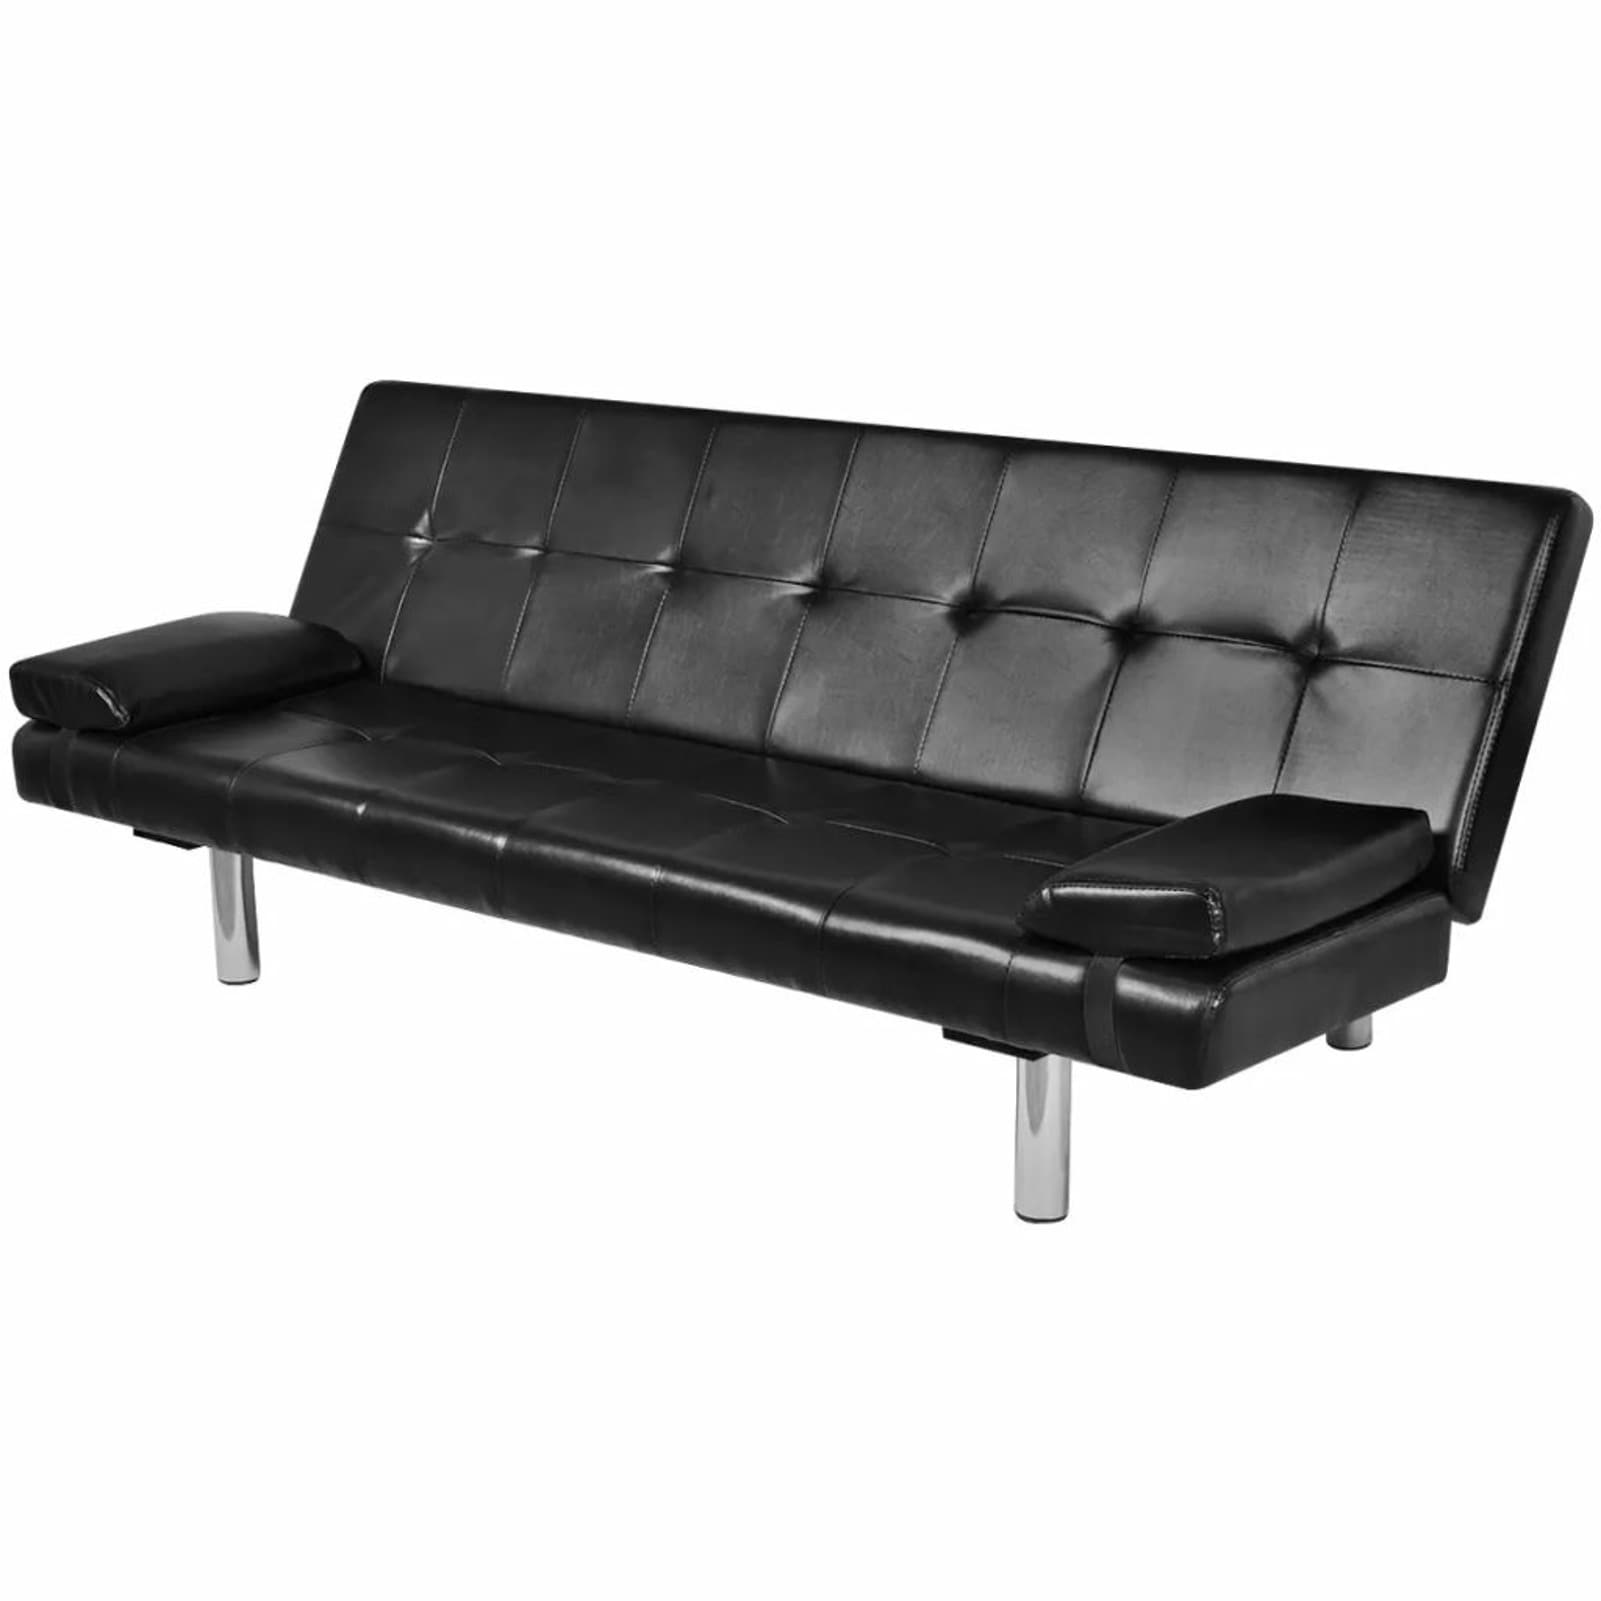 Global Pronex Sofa Bed with Two Pillows Artificial Leather Adjustable Black